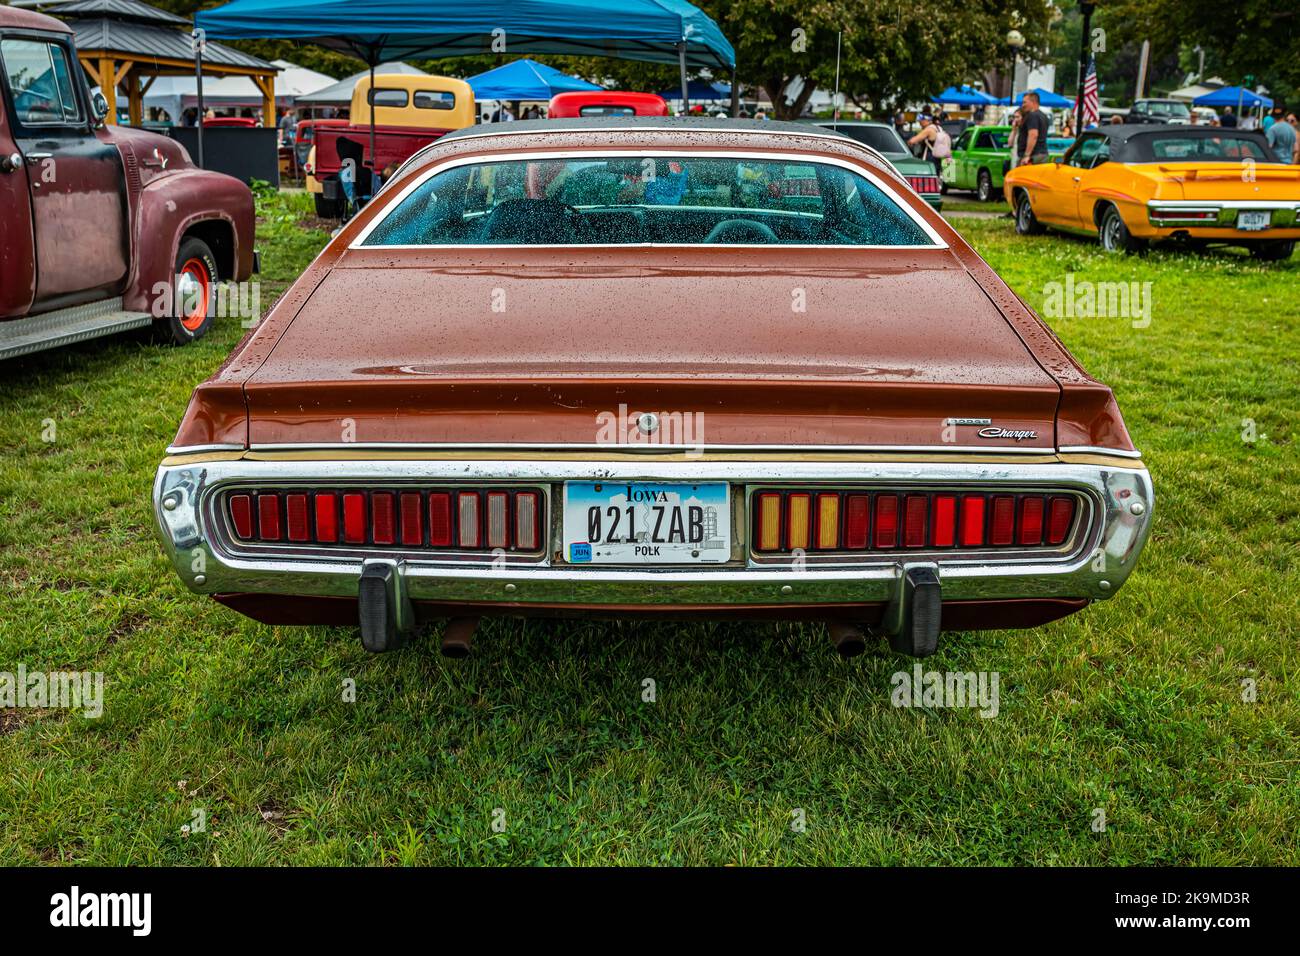 Des Moines, IA - July 01, 2022: High perspective rear view of a 1973 Dodge Charger Hardtop Coupe at a local car show. Stock Photo